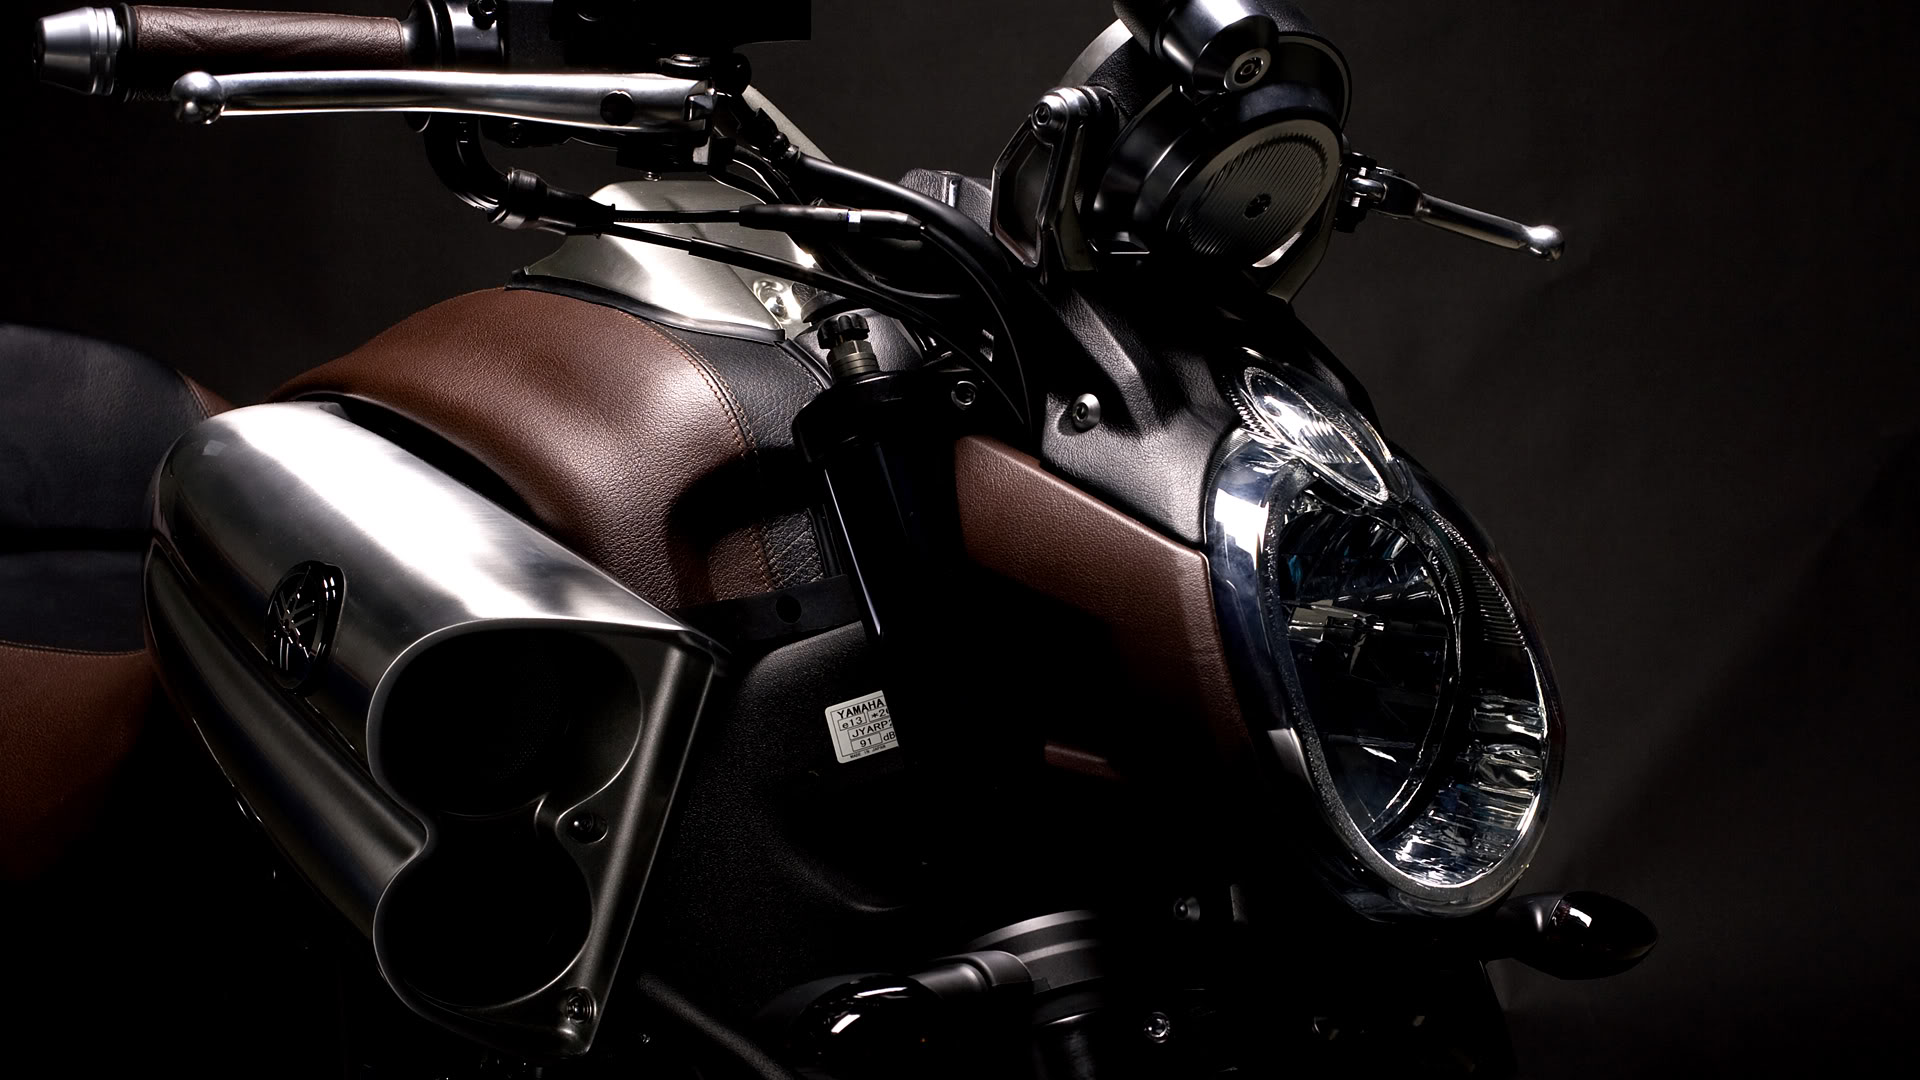 Yamaha Vmax Hermes HD Motorcycle With Resolutions